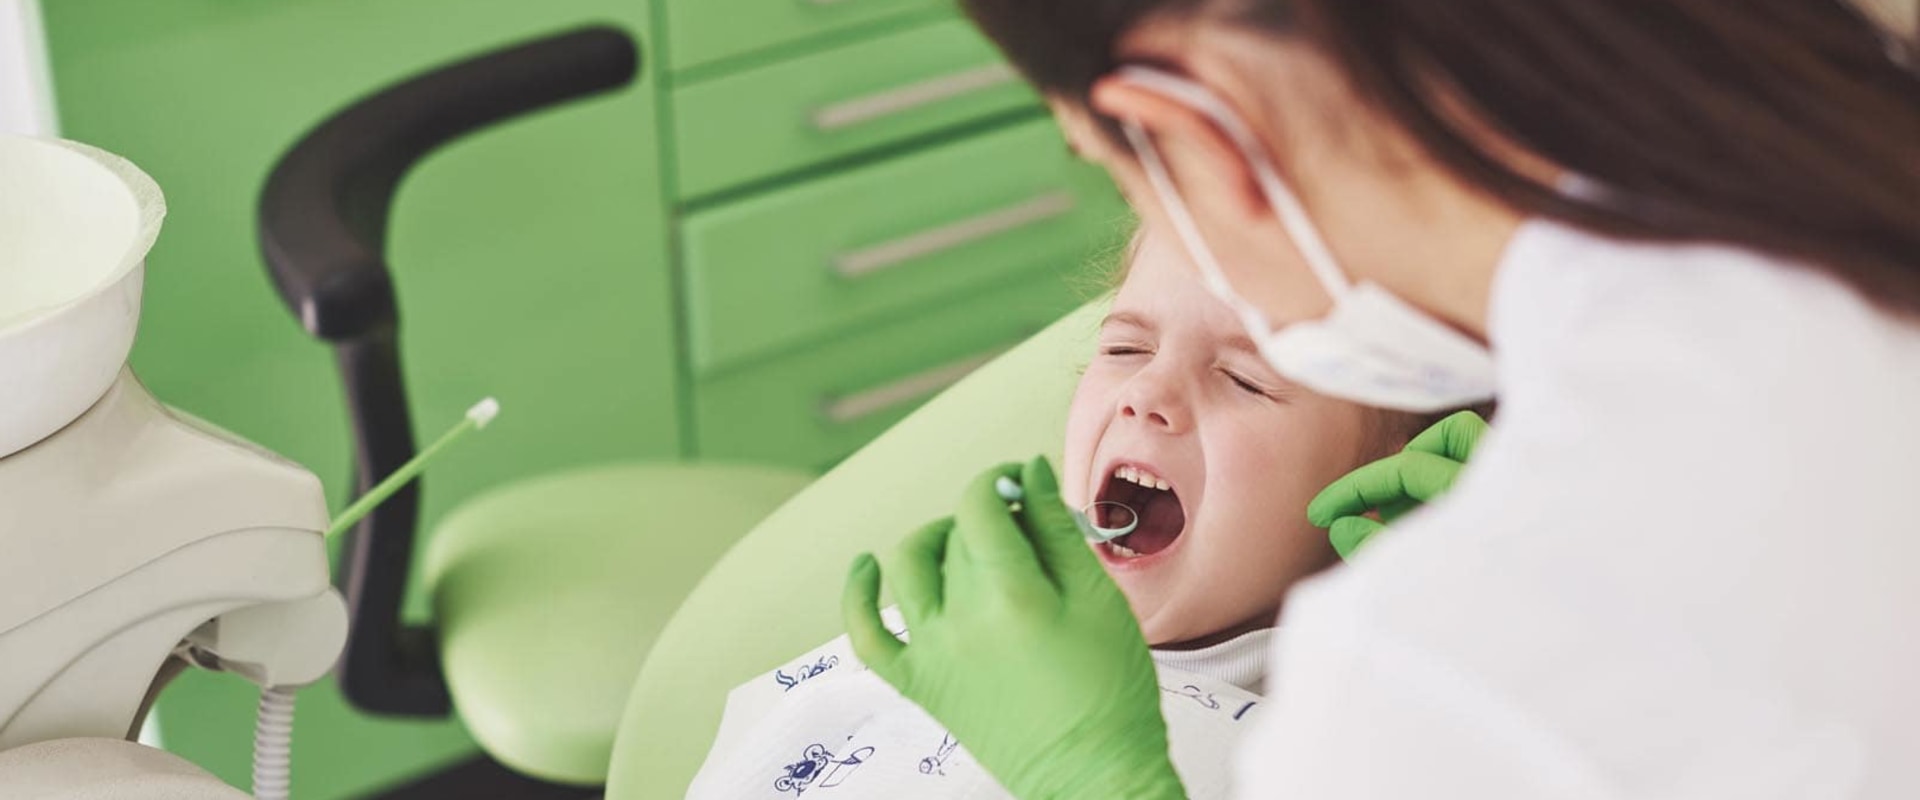 Why is Kids Dentistry Important for Children's Oral Health?